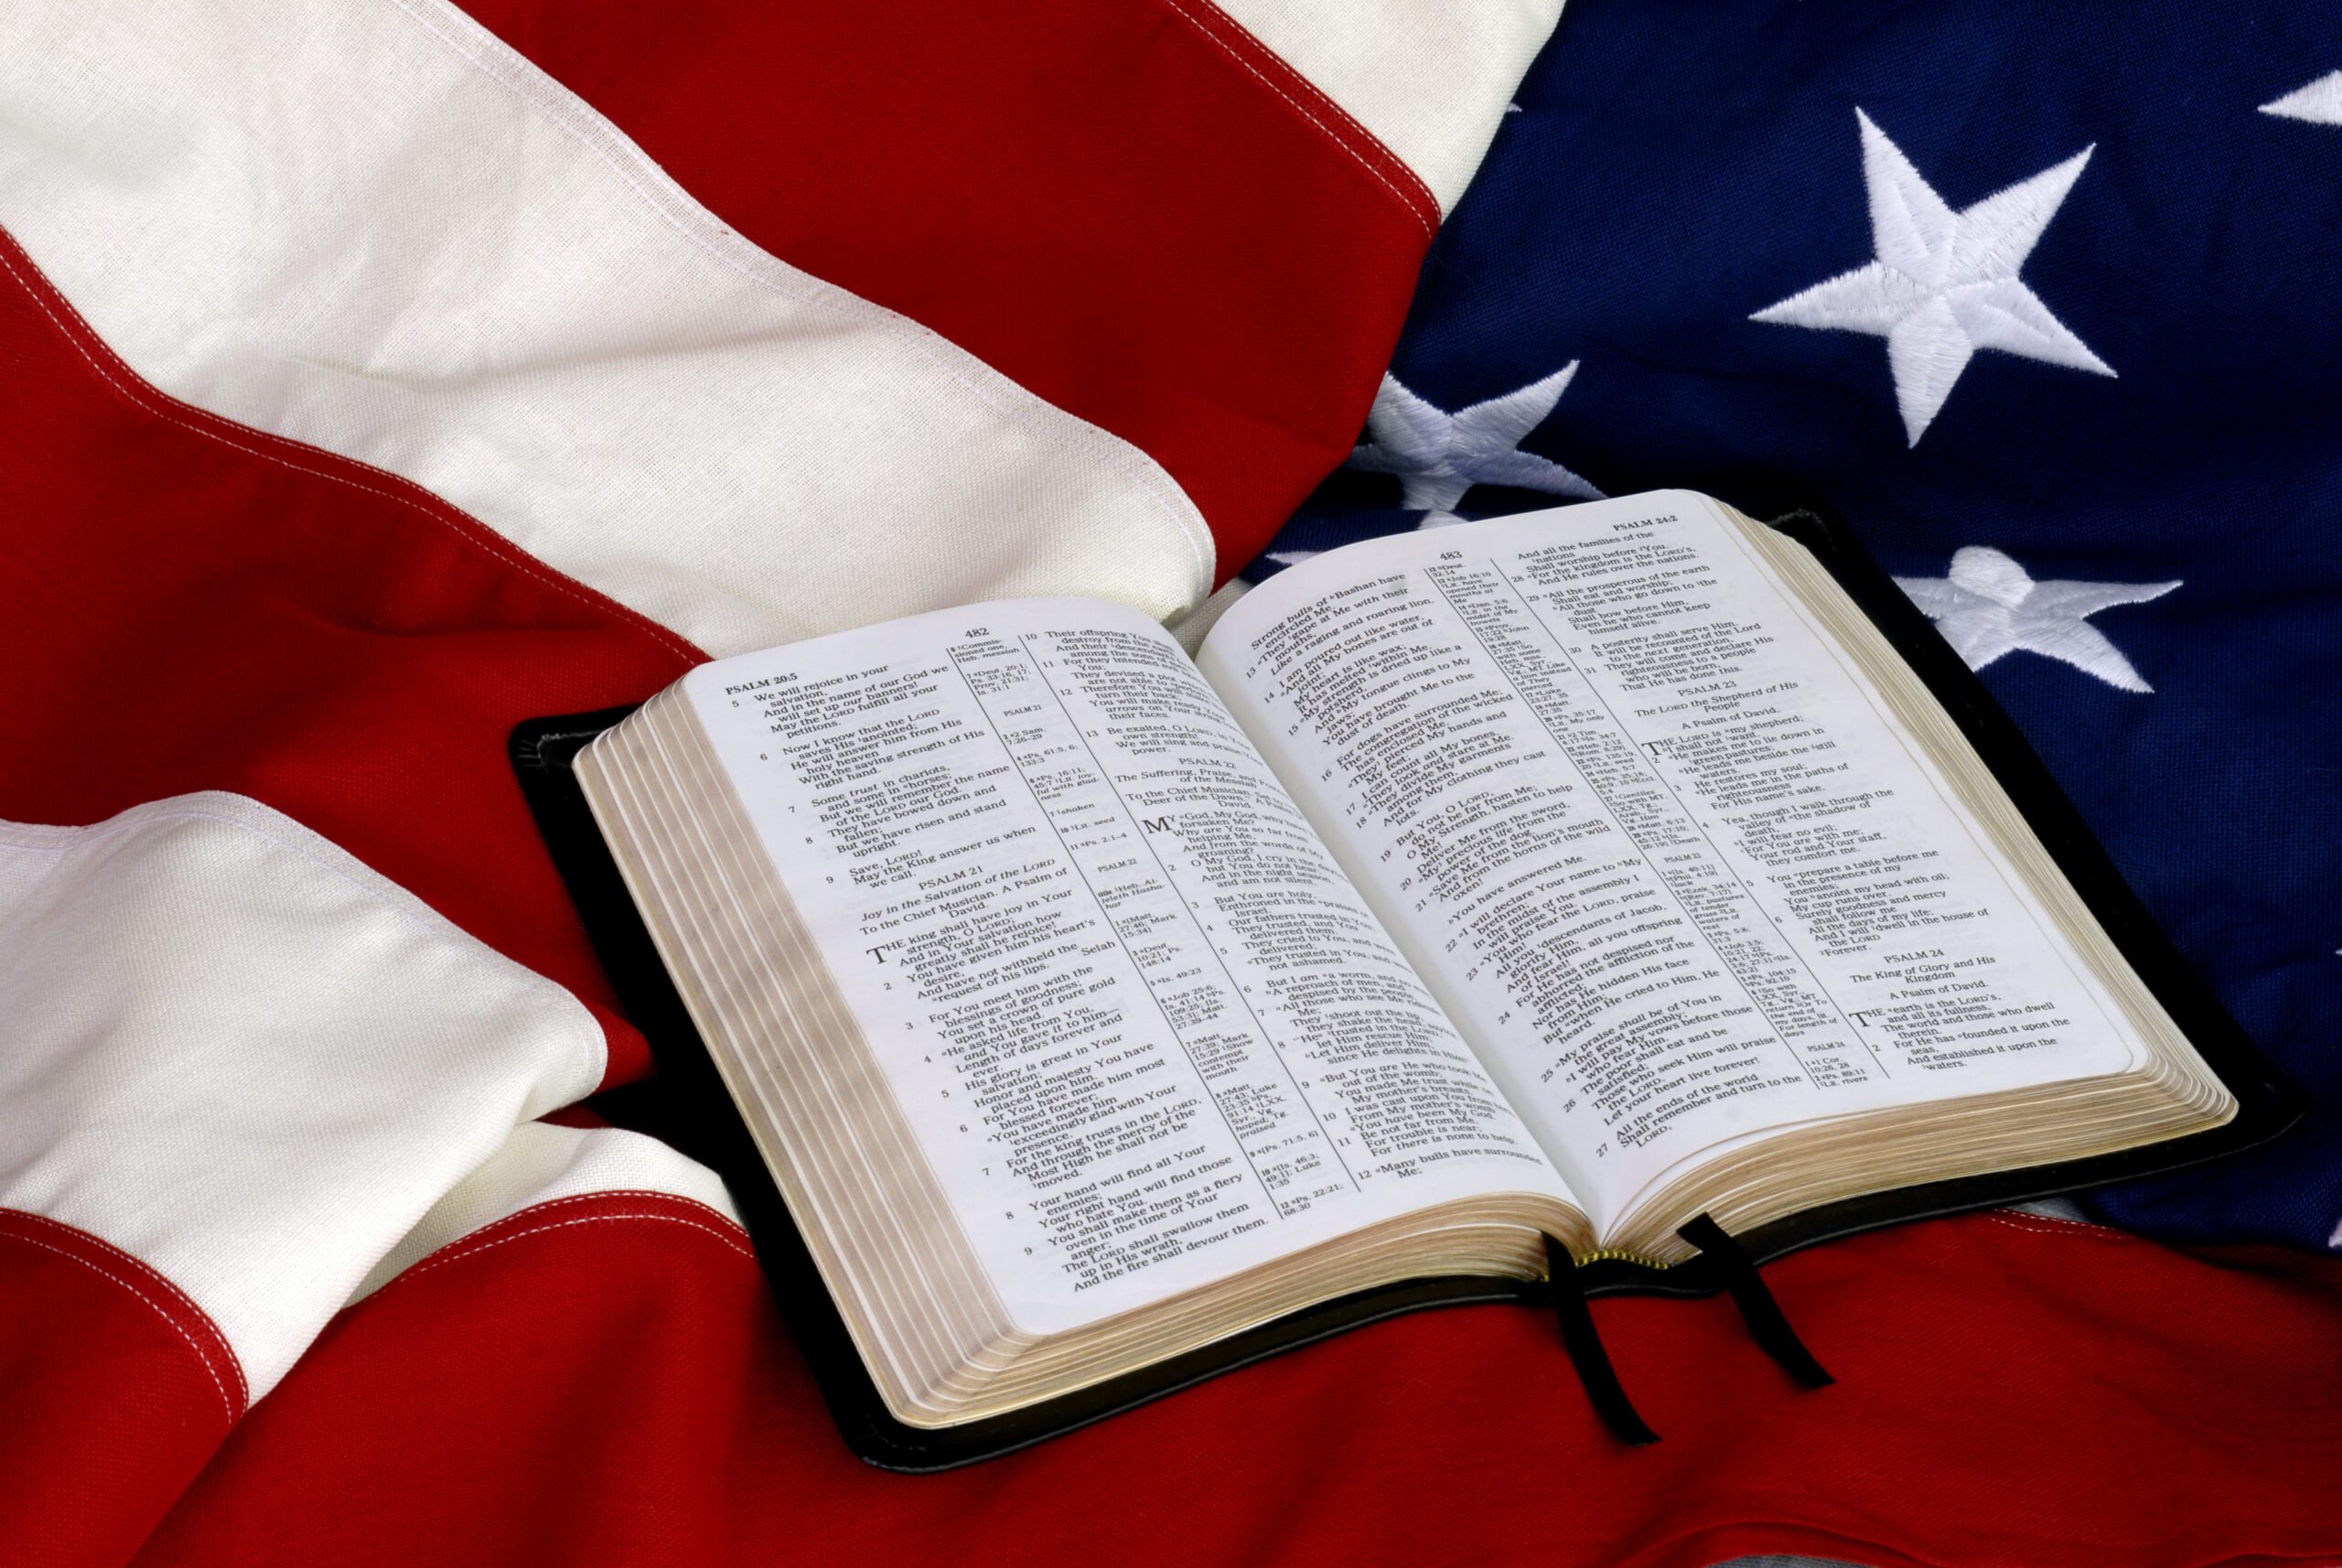 Concept image of freedom of religion, God and country, patriotism,etc.  Bible is open to the 23th Psalm.